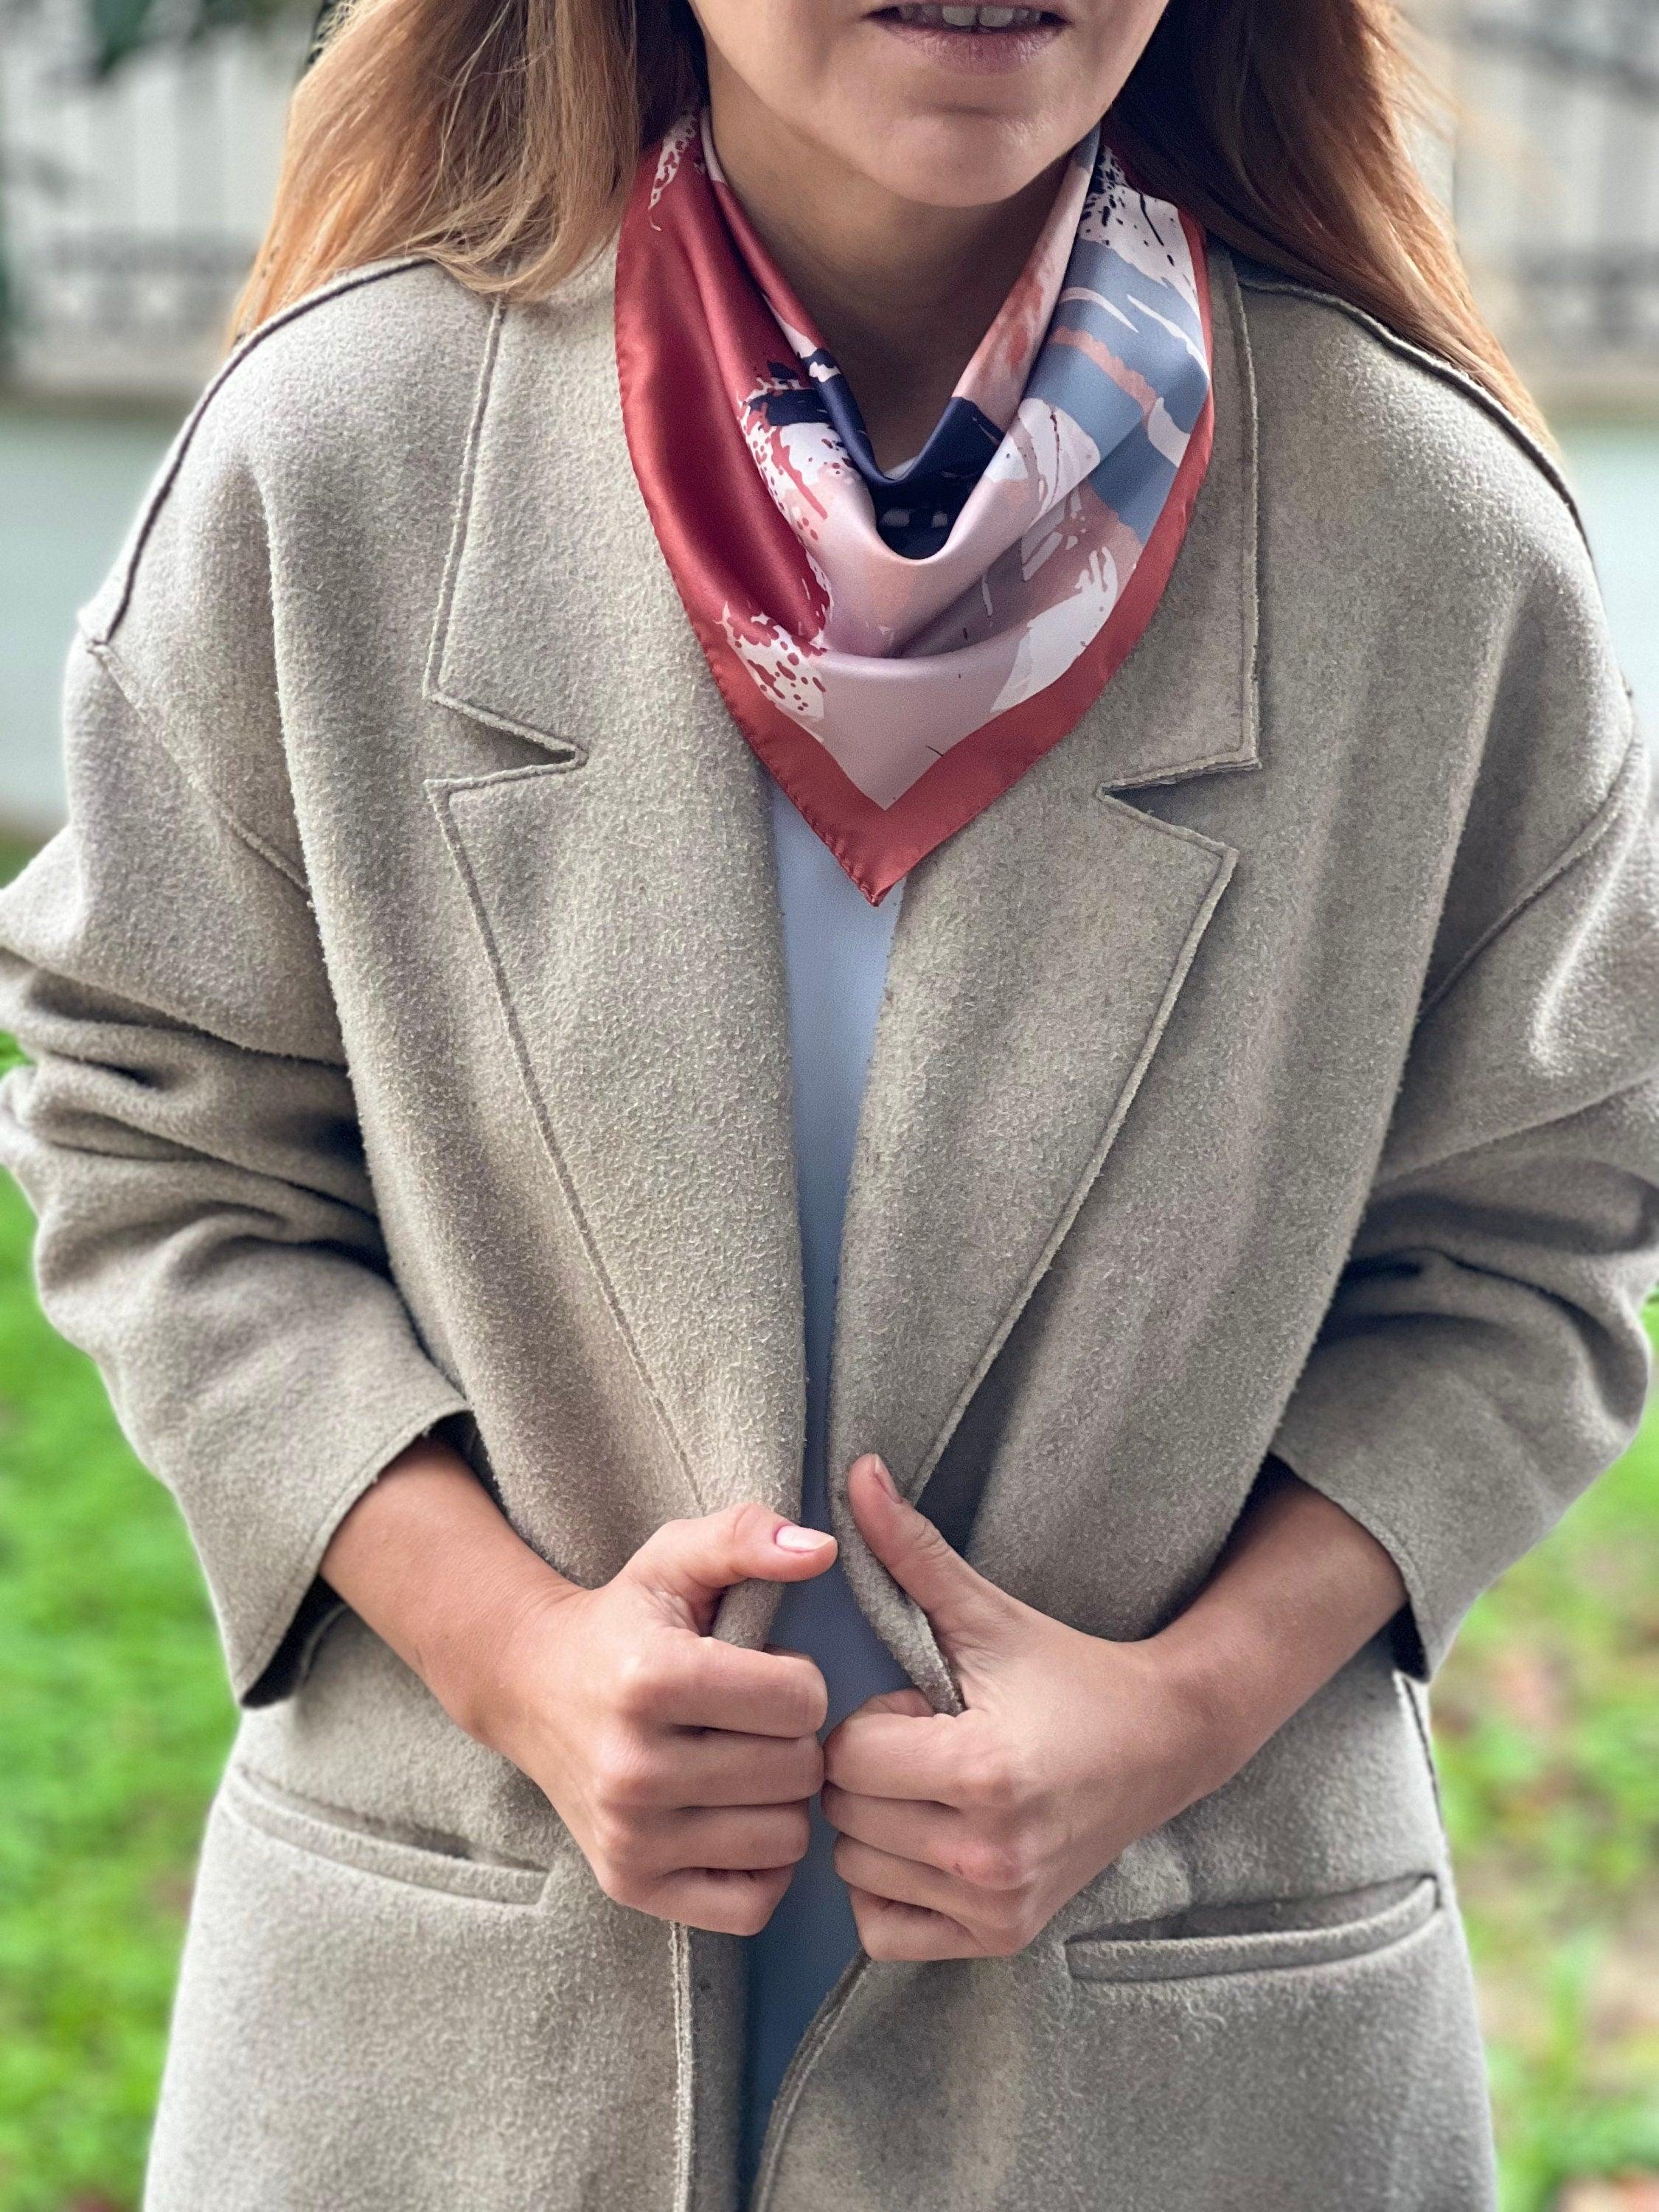 High-Quality 100% Satin Spring Scarf in Dark Blue Cream Art Pattern - Gift for Women, Neck Scarf, Hair Scarf, Red White Head Scarf available at Moyoni Design